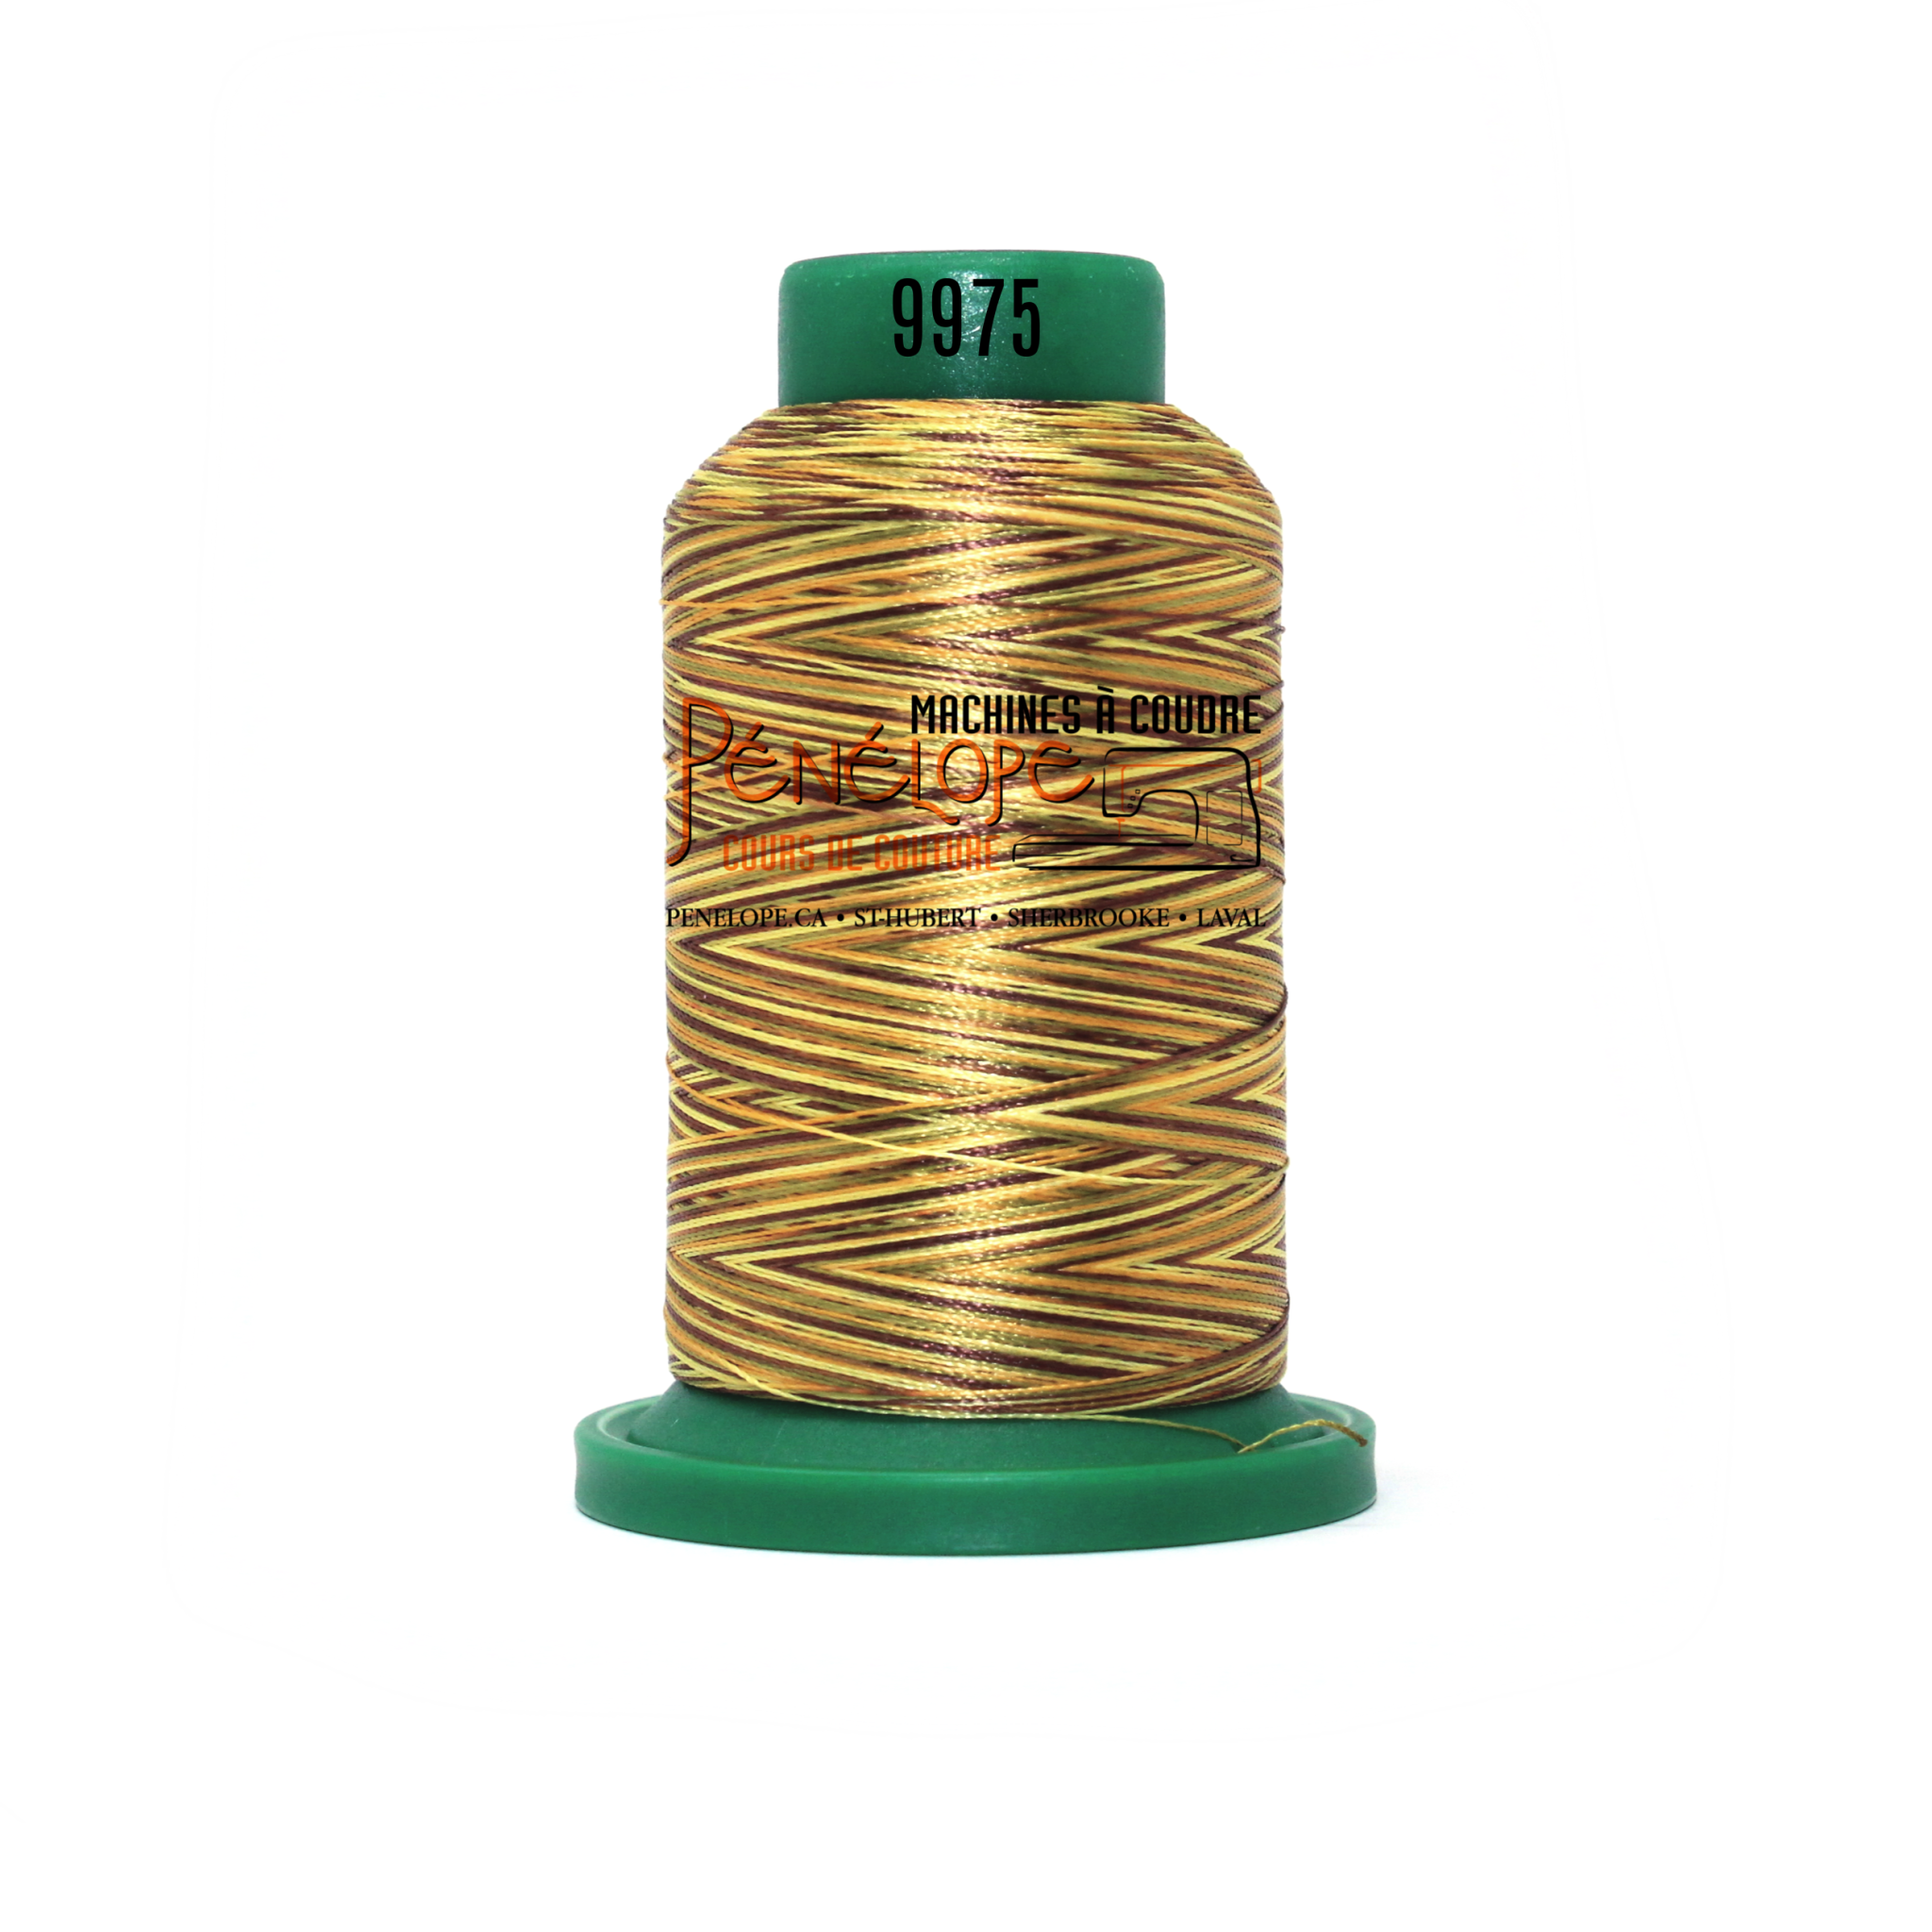 Isacord Isacord multicolor thread 9975 1000 m for embroidery and sewing